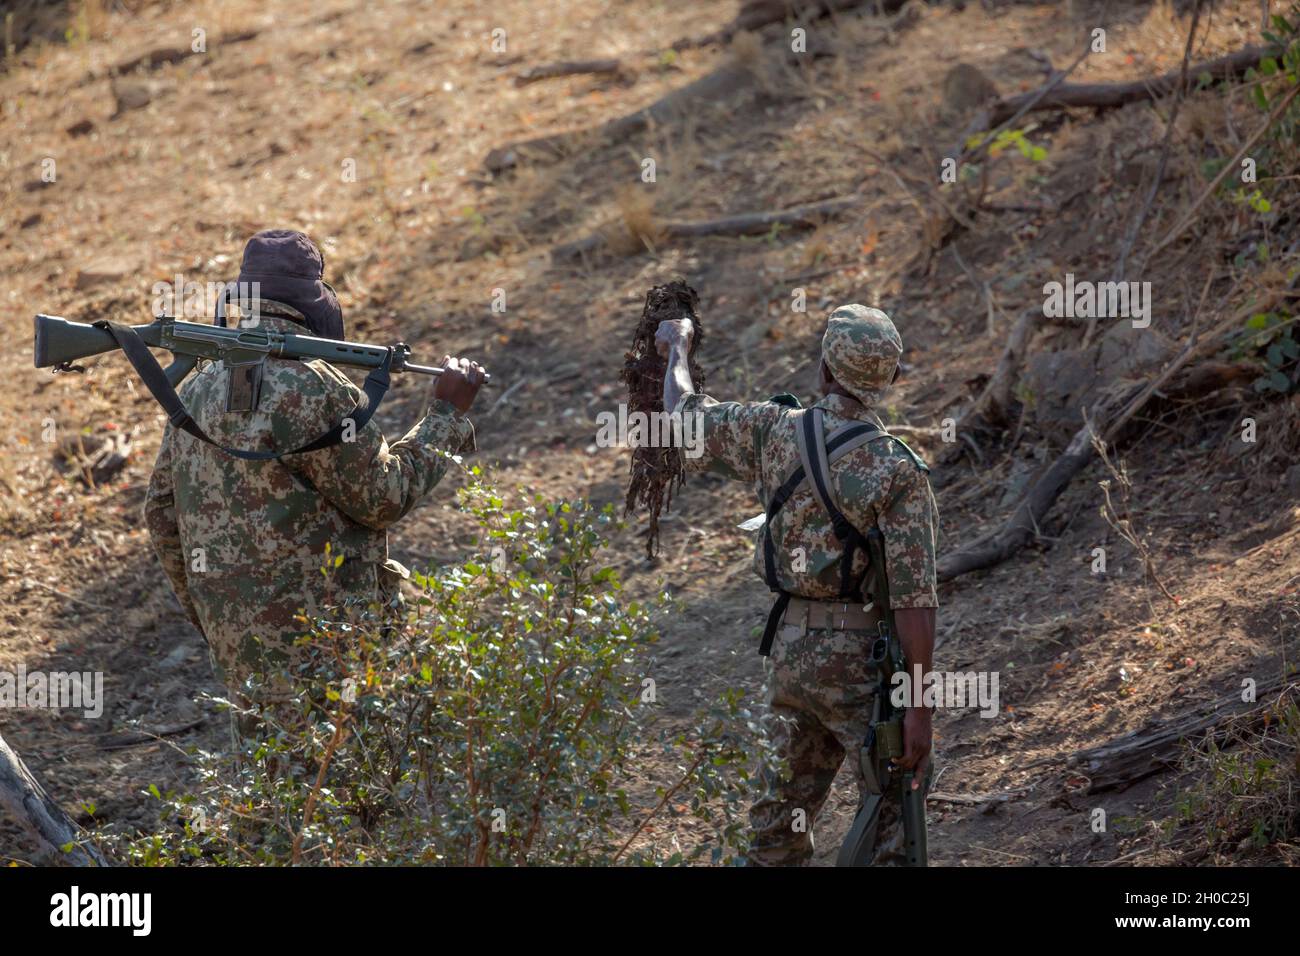 Anti poaching army team researching signs in Kruger national park, South Africa Stock Photo